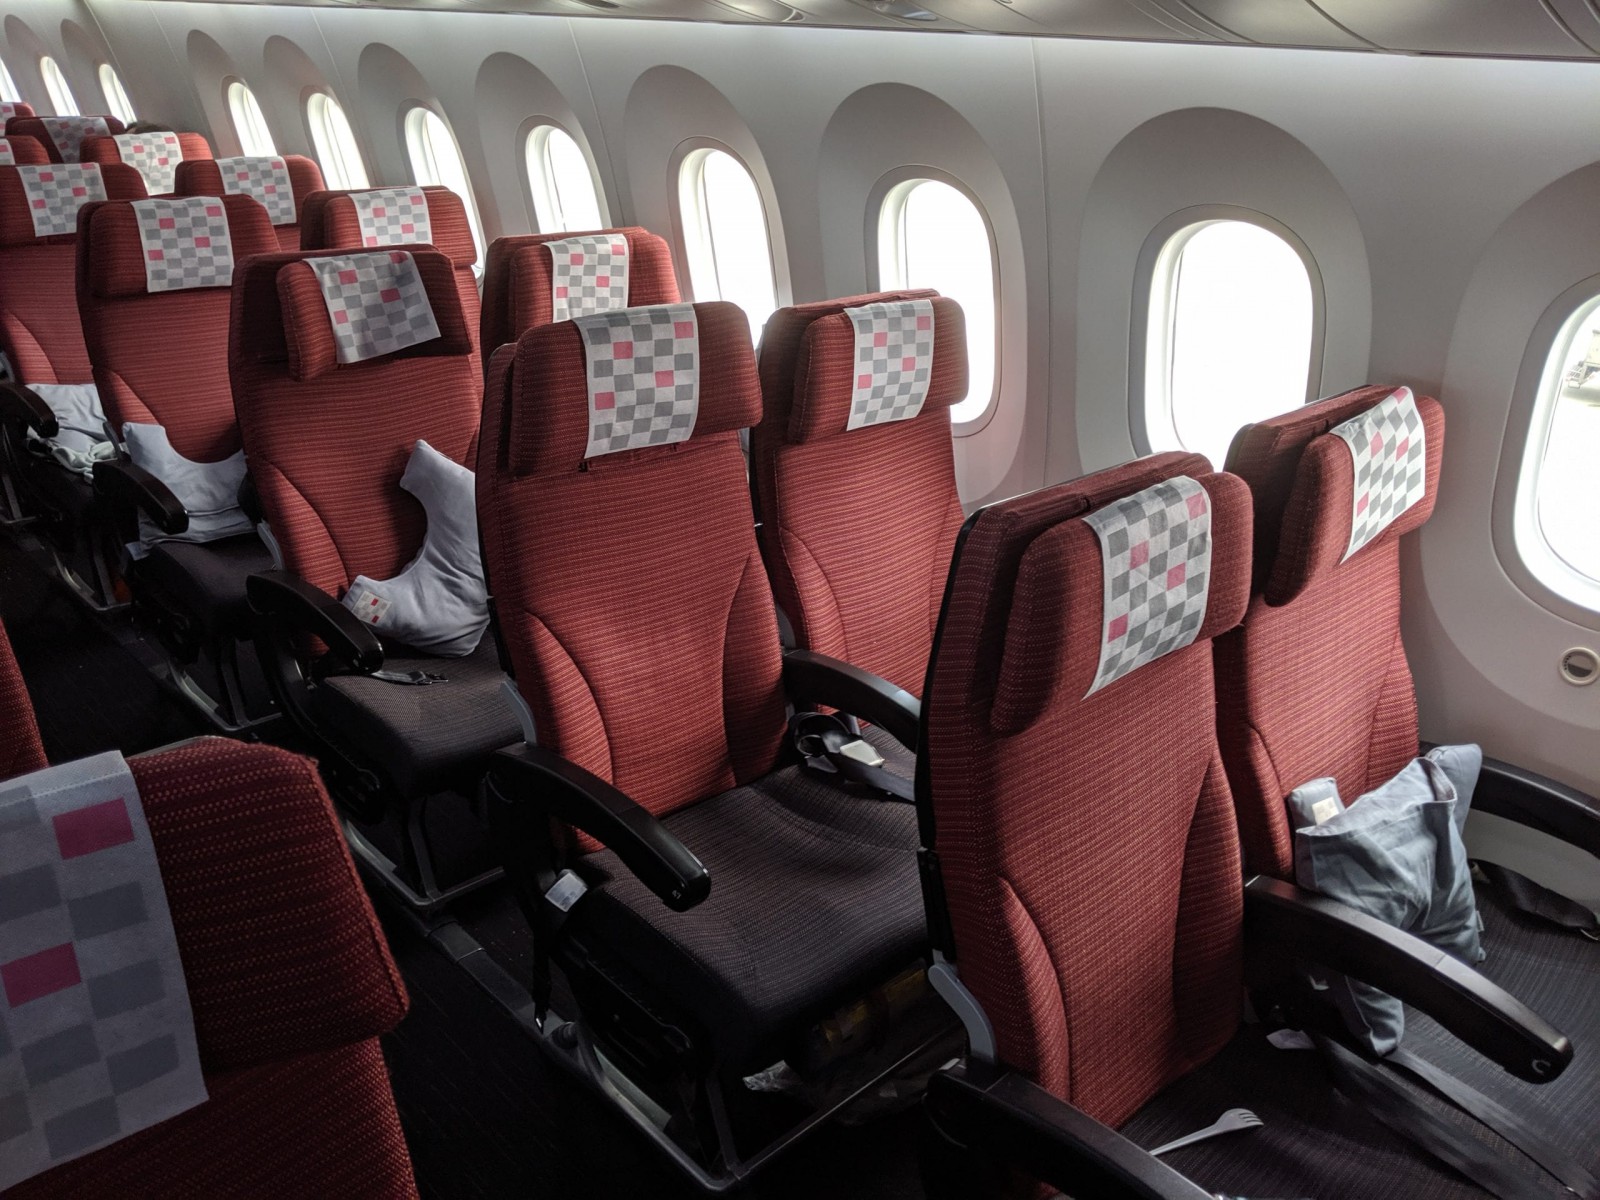 Flying in Comfort: Exploring the Airline with the Largest Economy Seats ...